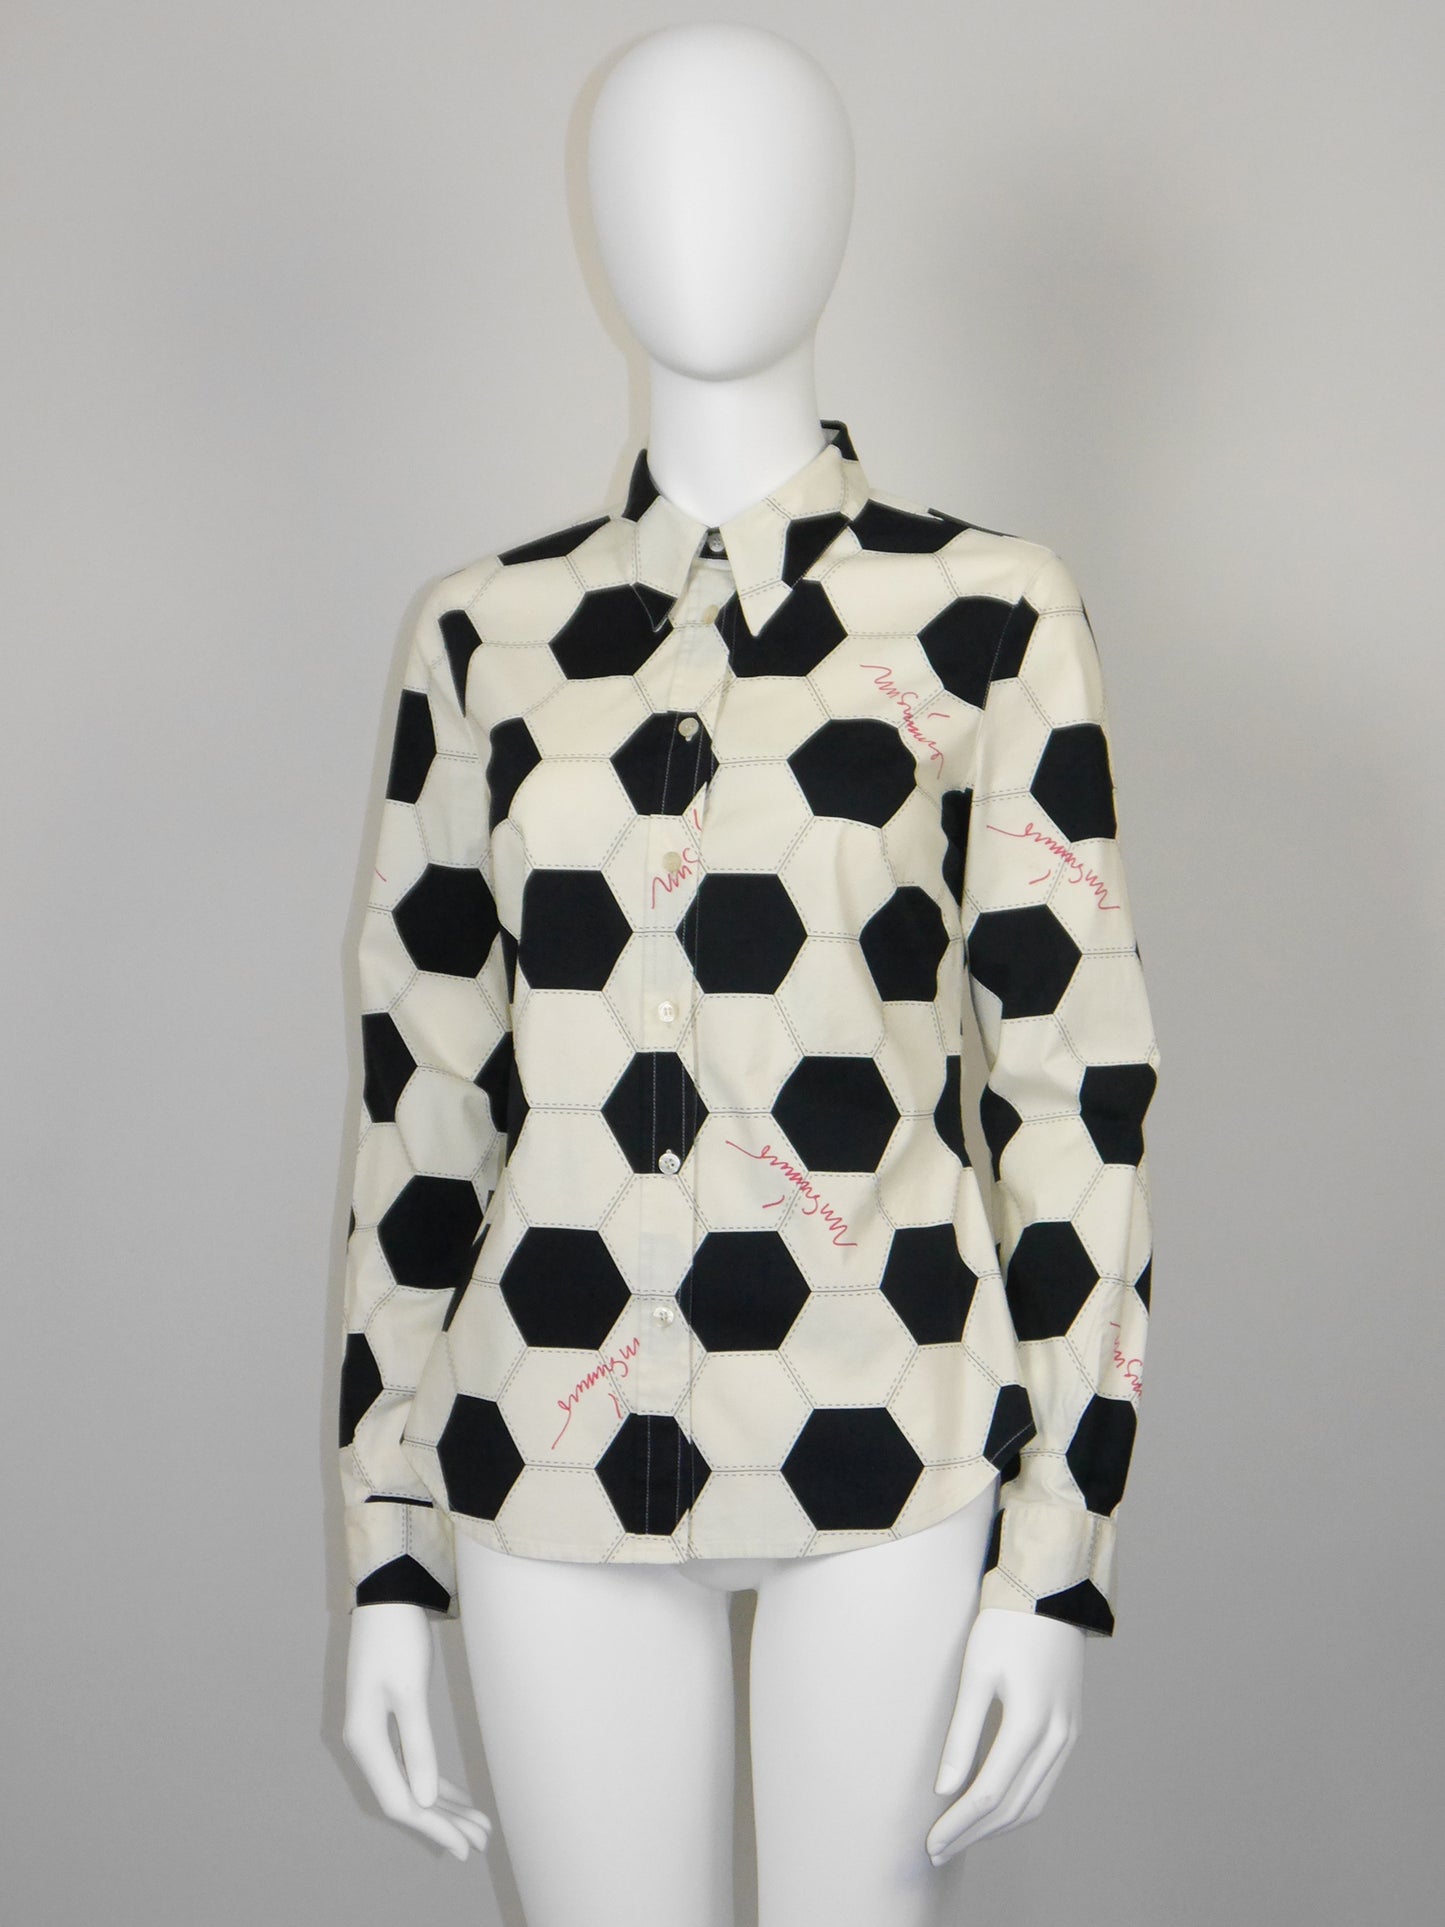 MOSCHINO 1990s 2000s Vintage Soccer Ball Print Shirt Blouse Size S